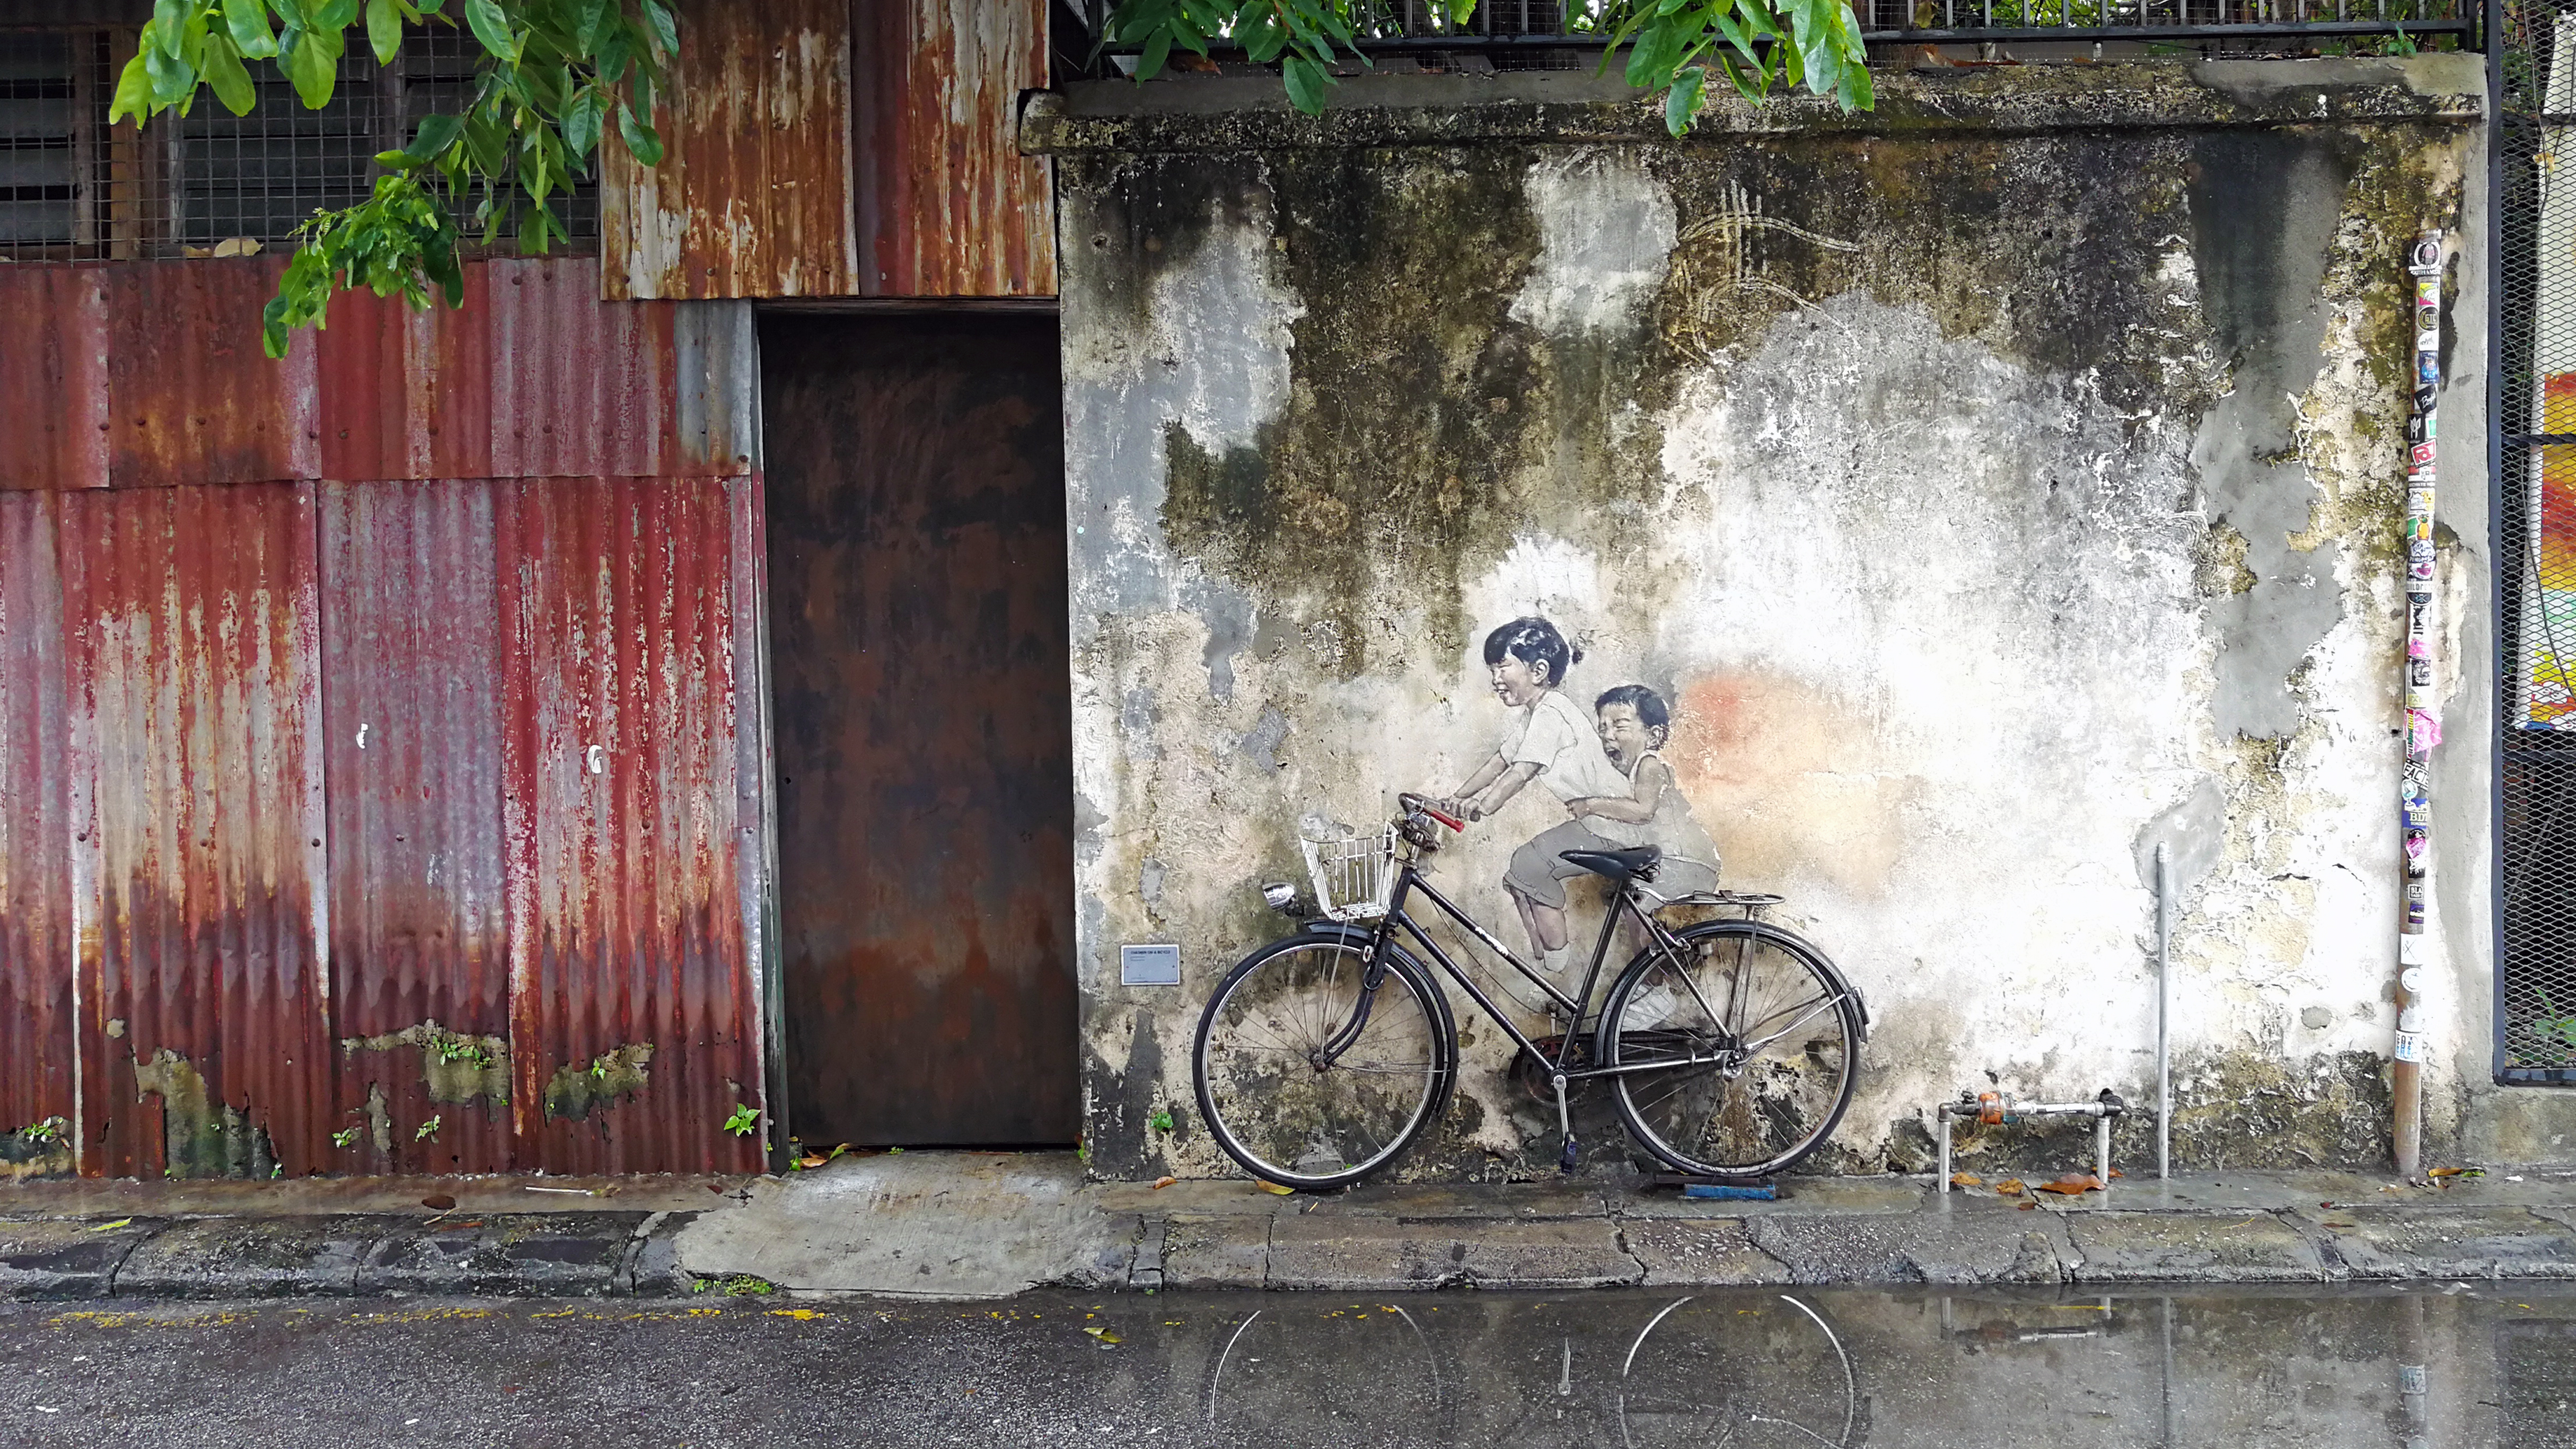 In Penang, tradition and heritage thrive. The well-loved George Town is awash in culture and arts, while the laidback Balik Pulau combines countryside with nature. Explore and be won over by both sides of the island’s many charms. Photo by Alexandra Wong